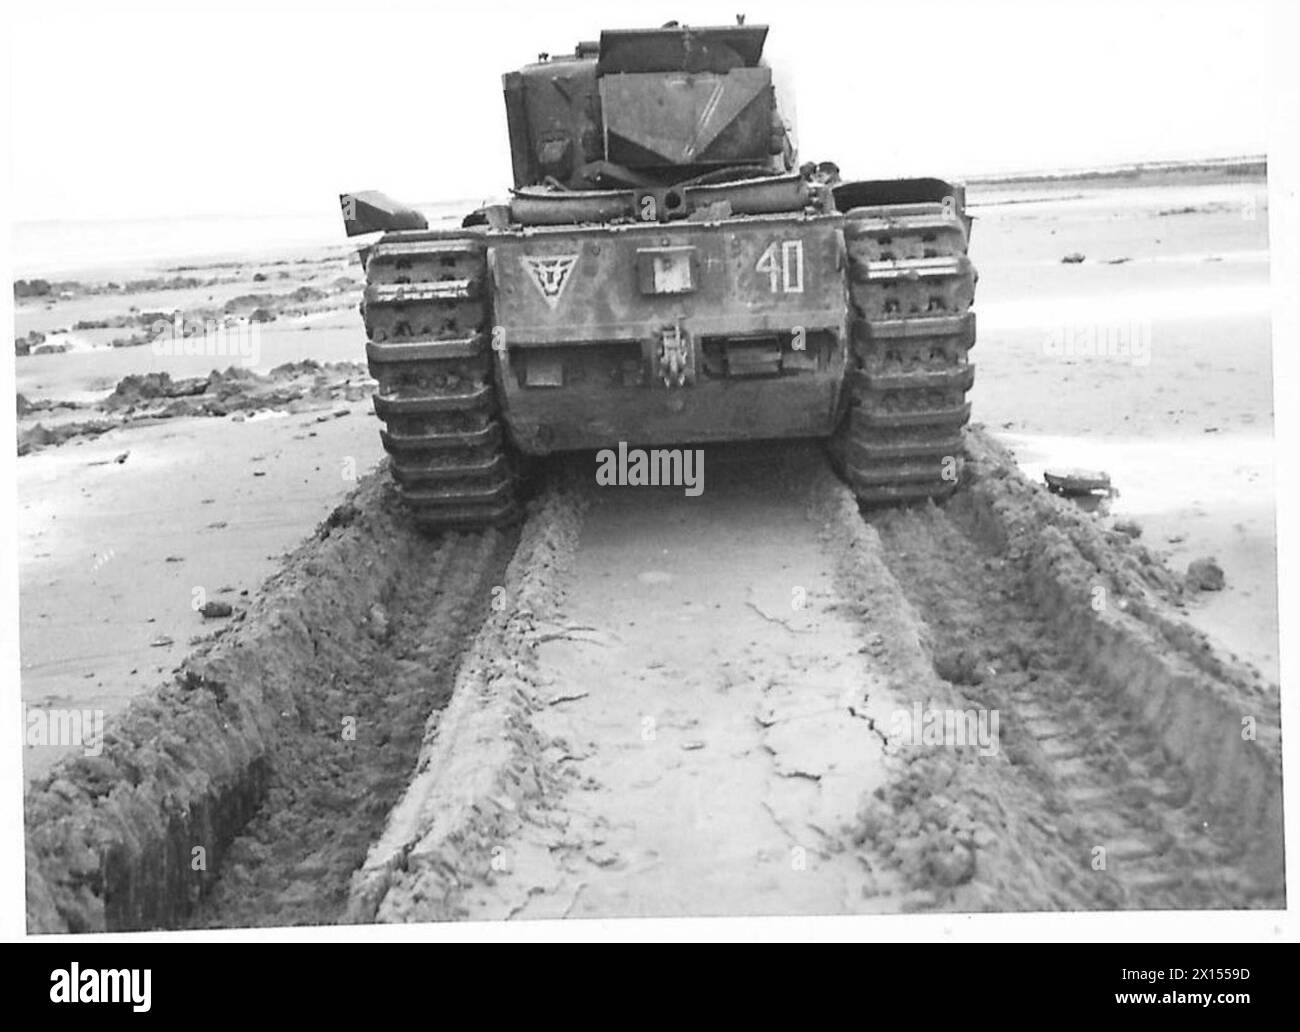 SPECIAL ASSIGNMENT FOR 79TH ARMOURED DIVISION - Tracks made in sand during run British Army Stock Photo